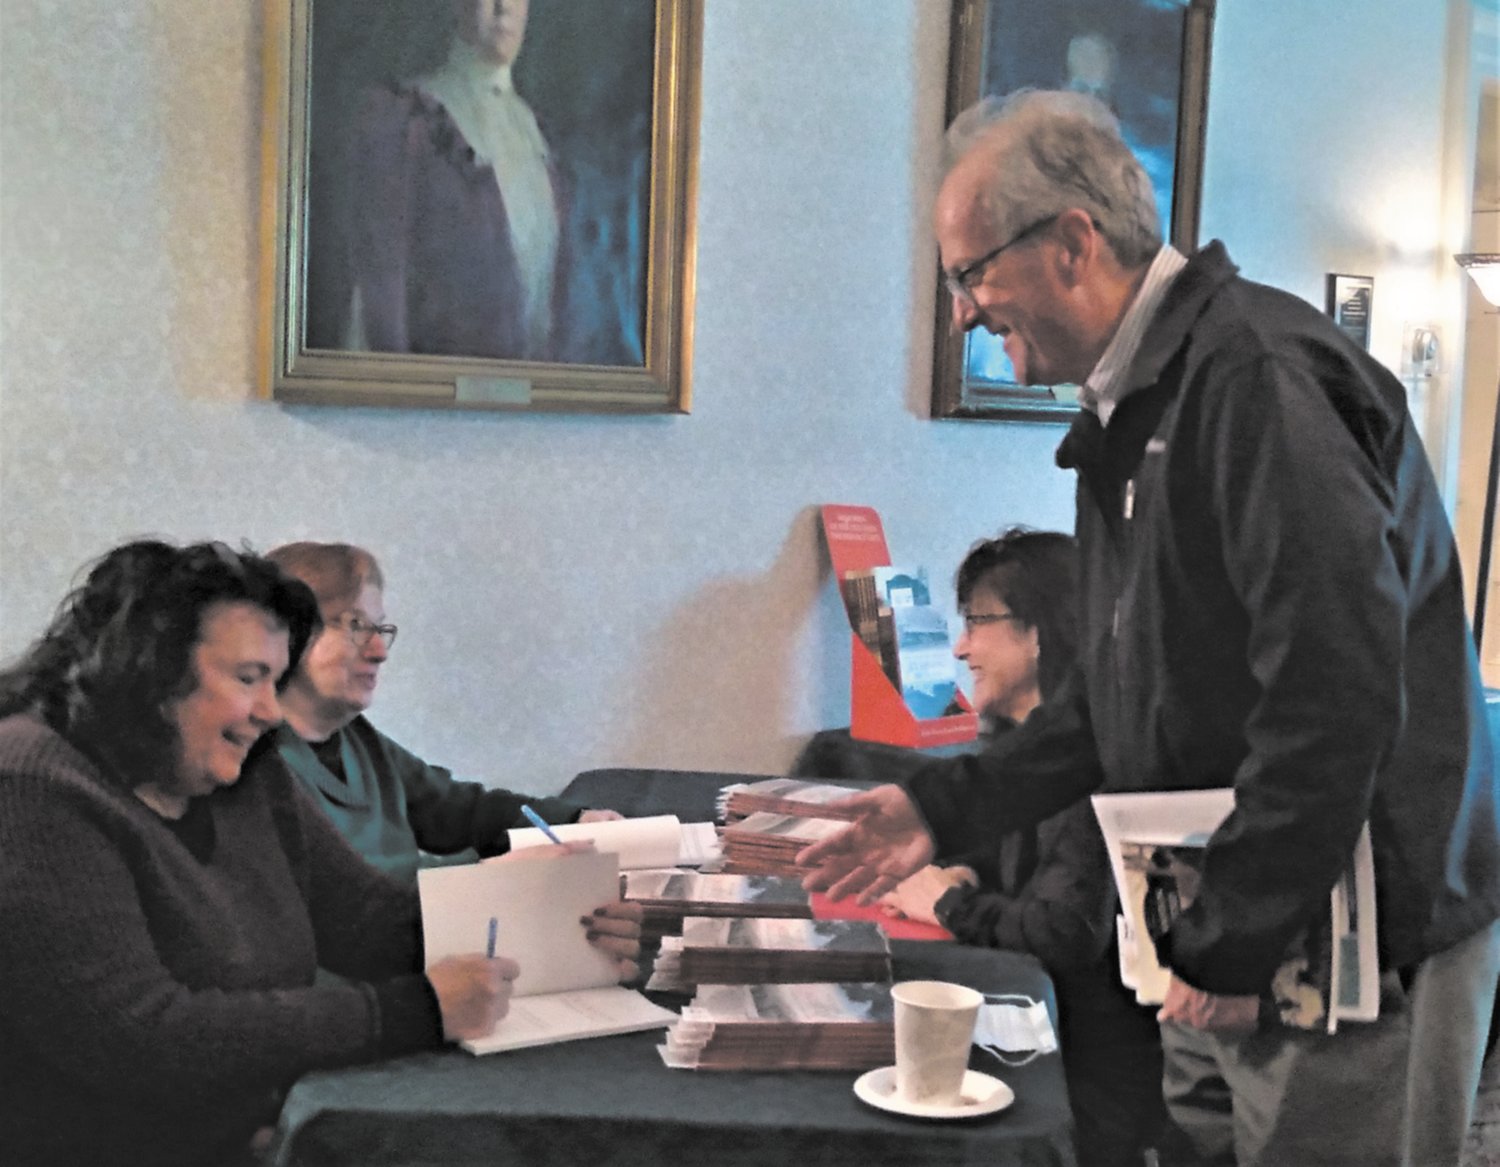 SIGNED PERSONALLY: Co-authors, Janet Ragno and Sandra Moyer, sign copies of their book, “Cranston Through Time,” for Debra Brown and John O’Leary on March 15. All proceeds go to benefit the Cranston Historical Society. Copies can be purchased through the Society’